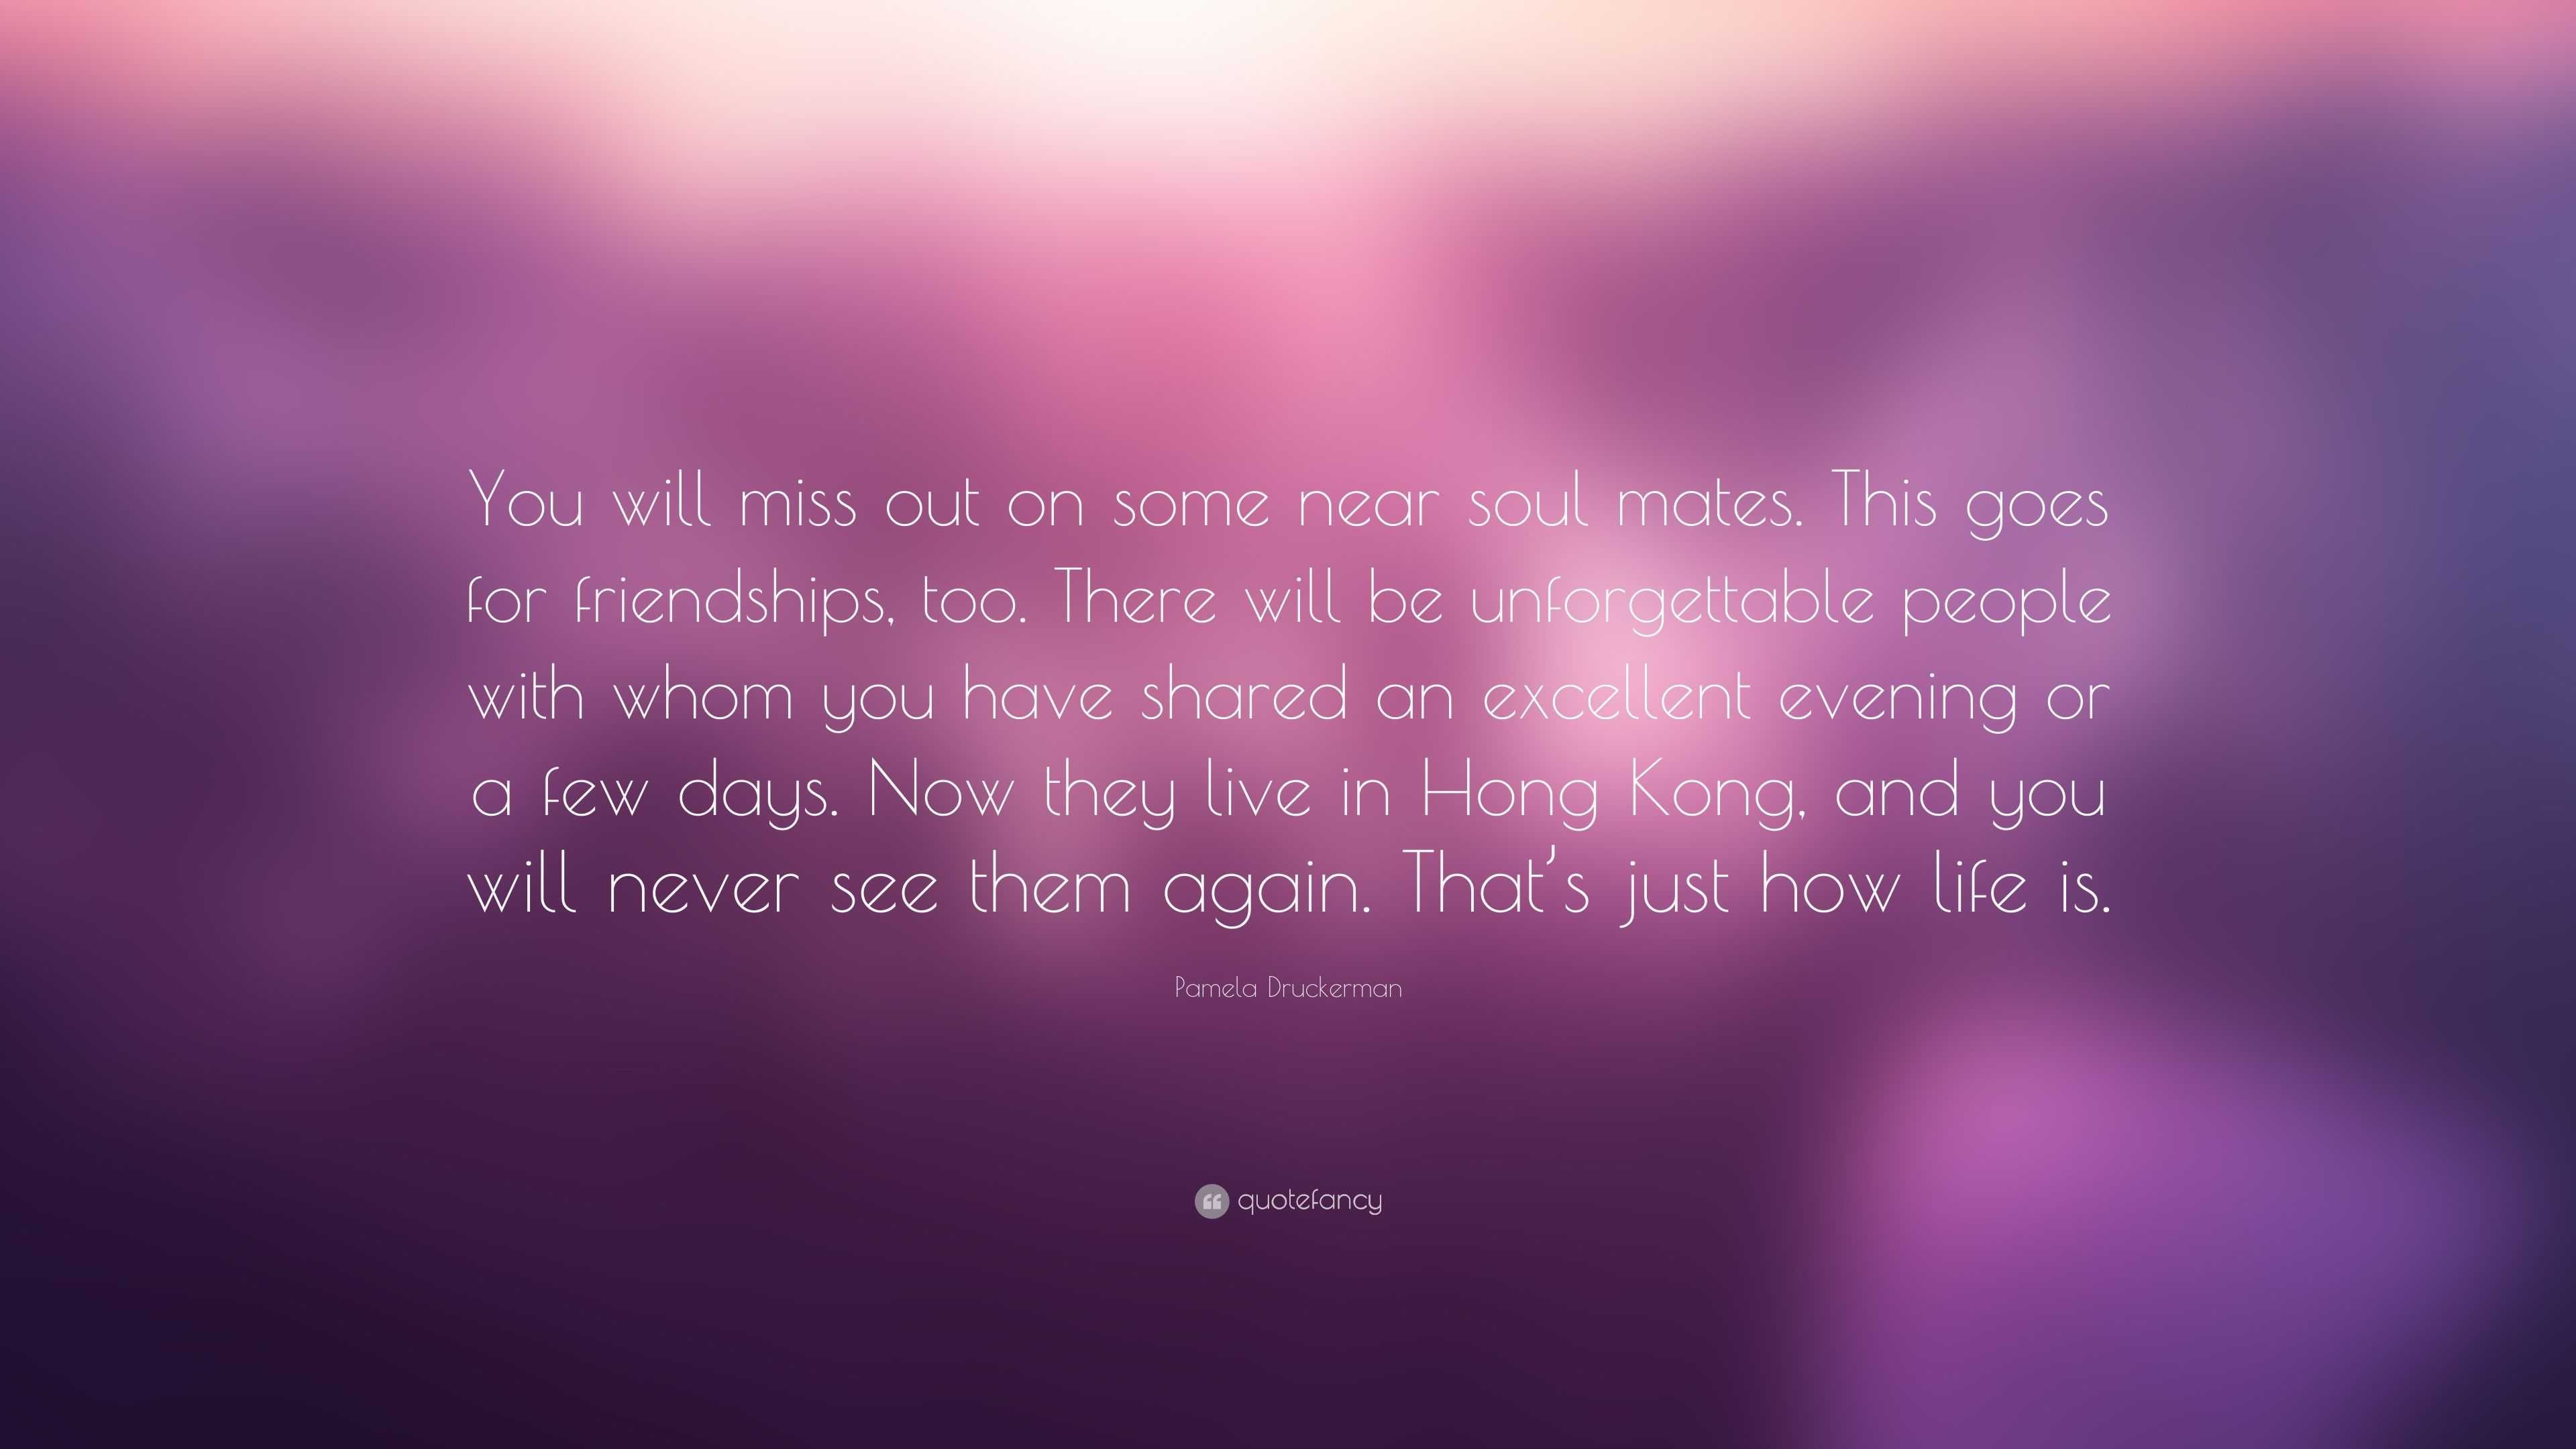 Pamela Druckerman Quote: “You will miss out on some near soul mates ...